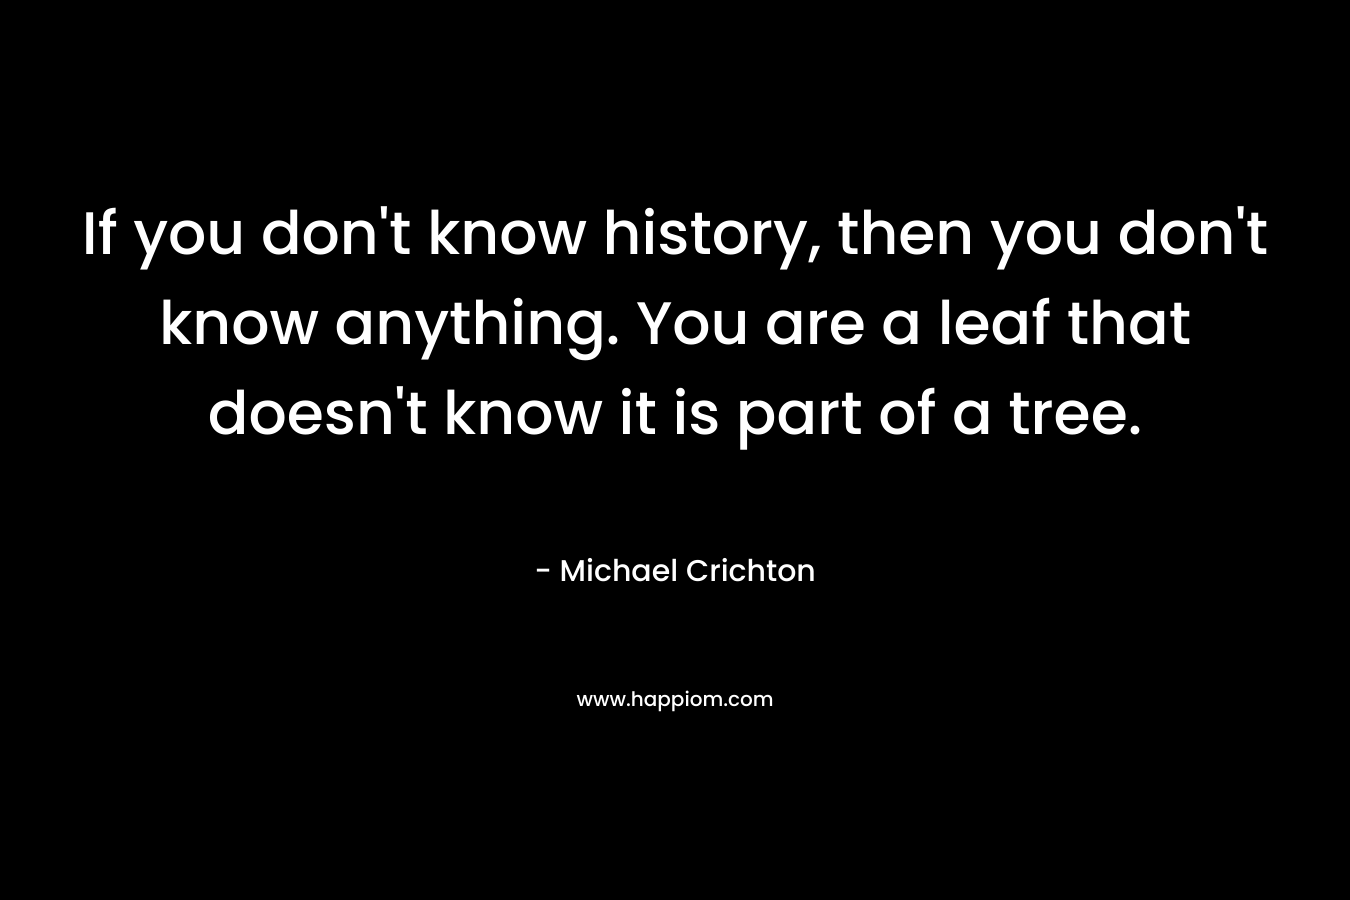 If you don't know history, then you don't know anything. You are a leaf that doesn't know it is part of a tree. 